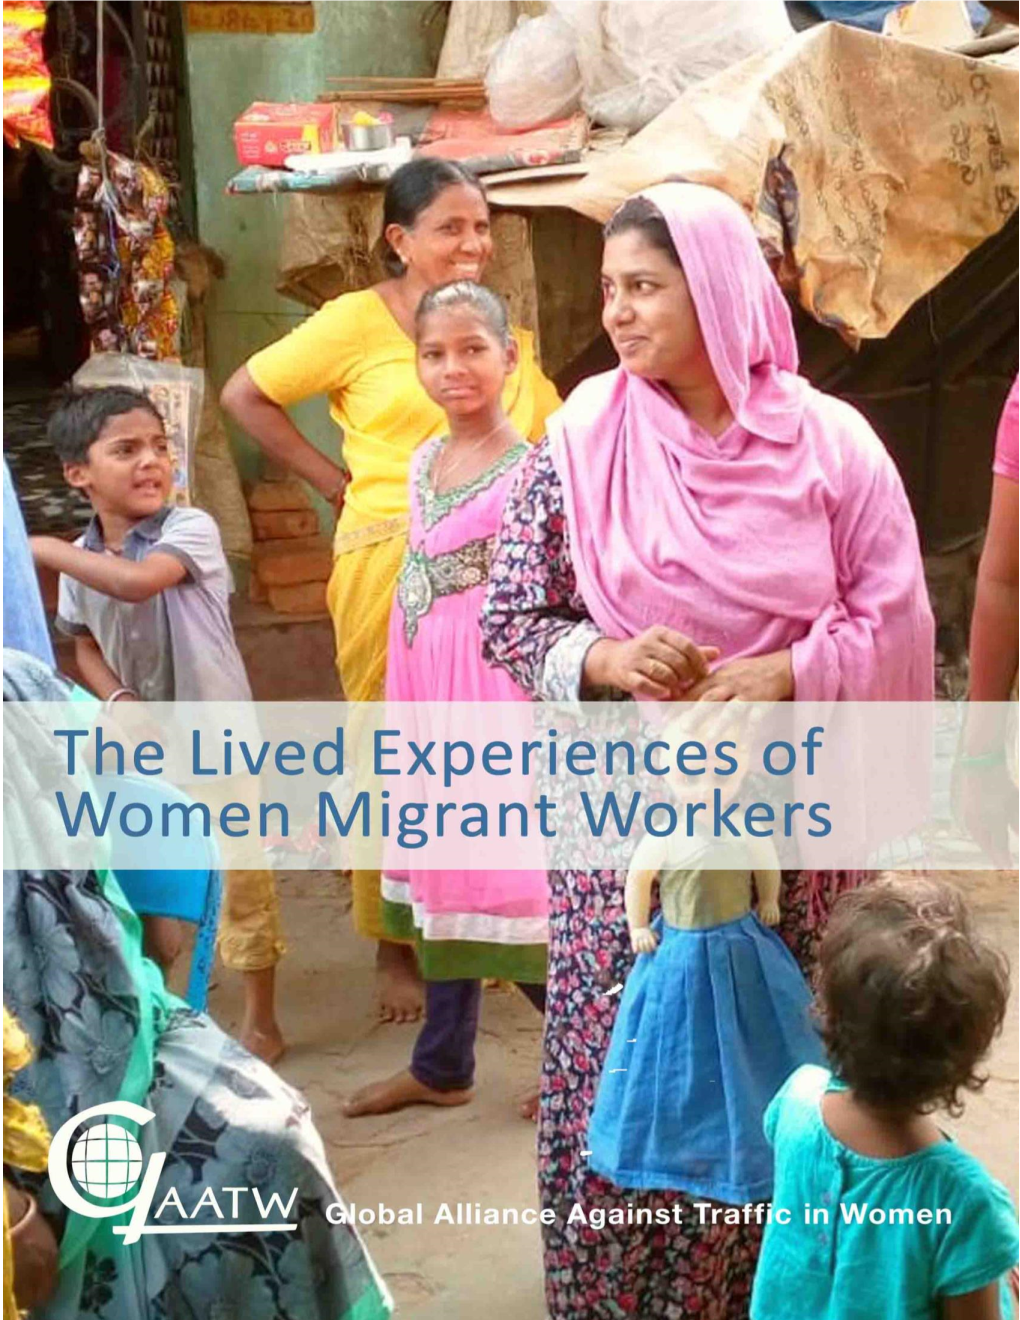 Lived Experiences of Women Migrant Workers GAATW, 2019